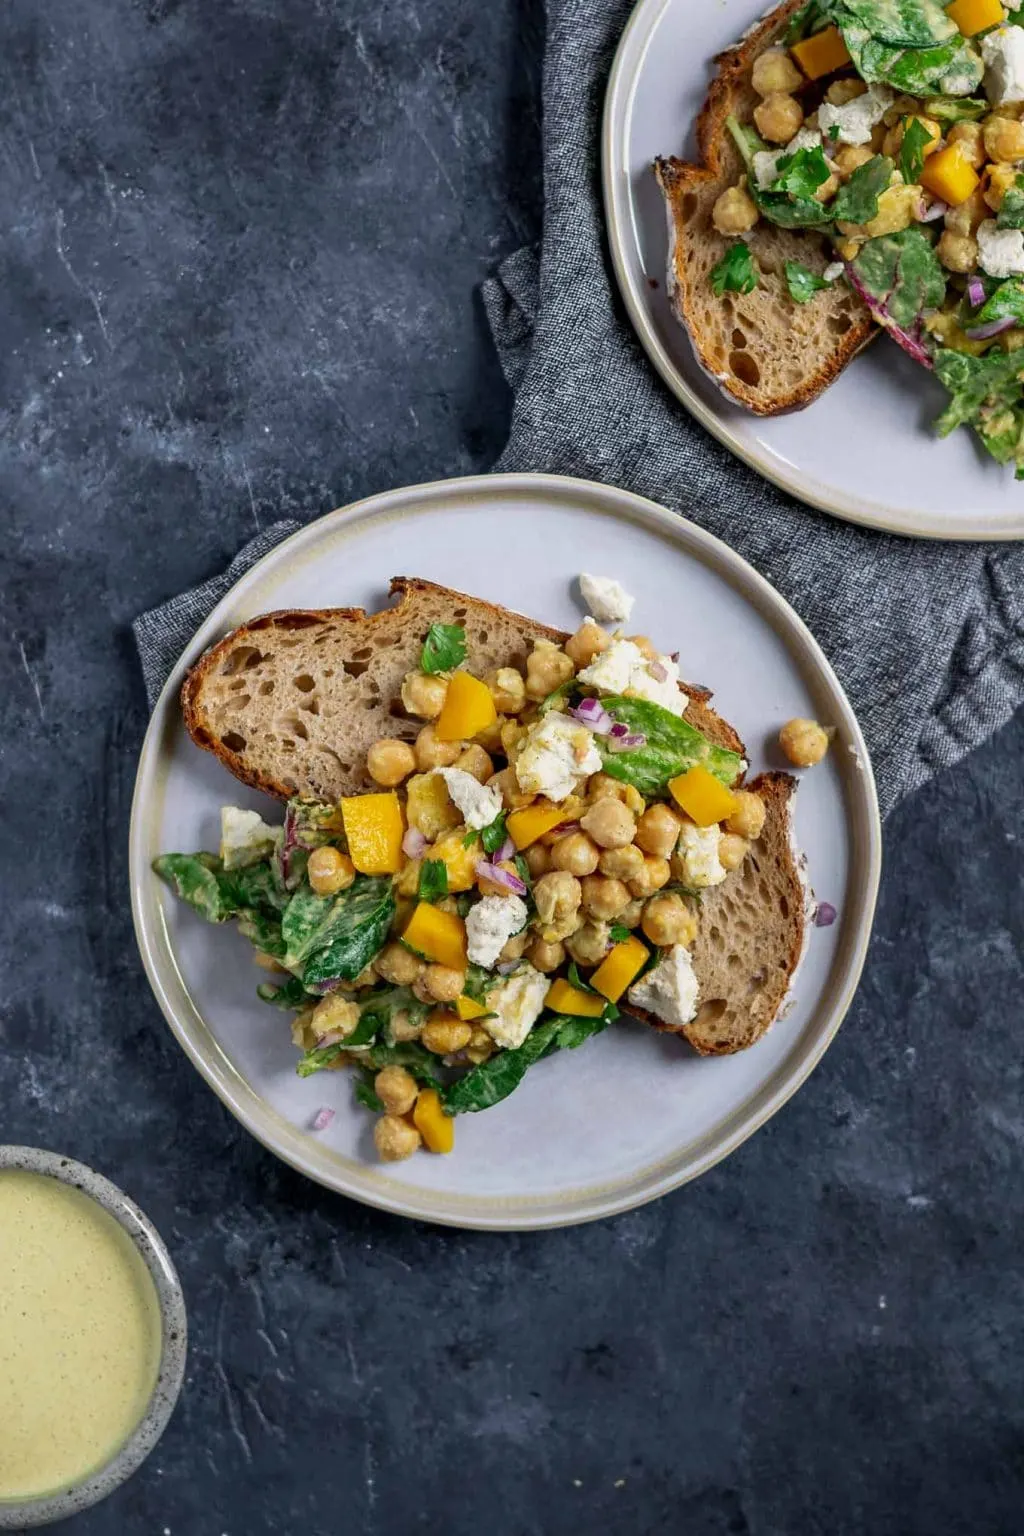 Curried chickpea and mango salad with vegan queso fresco served over a slice of toast.